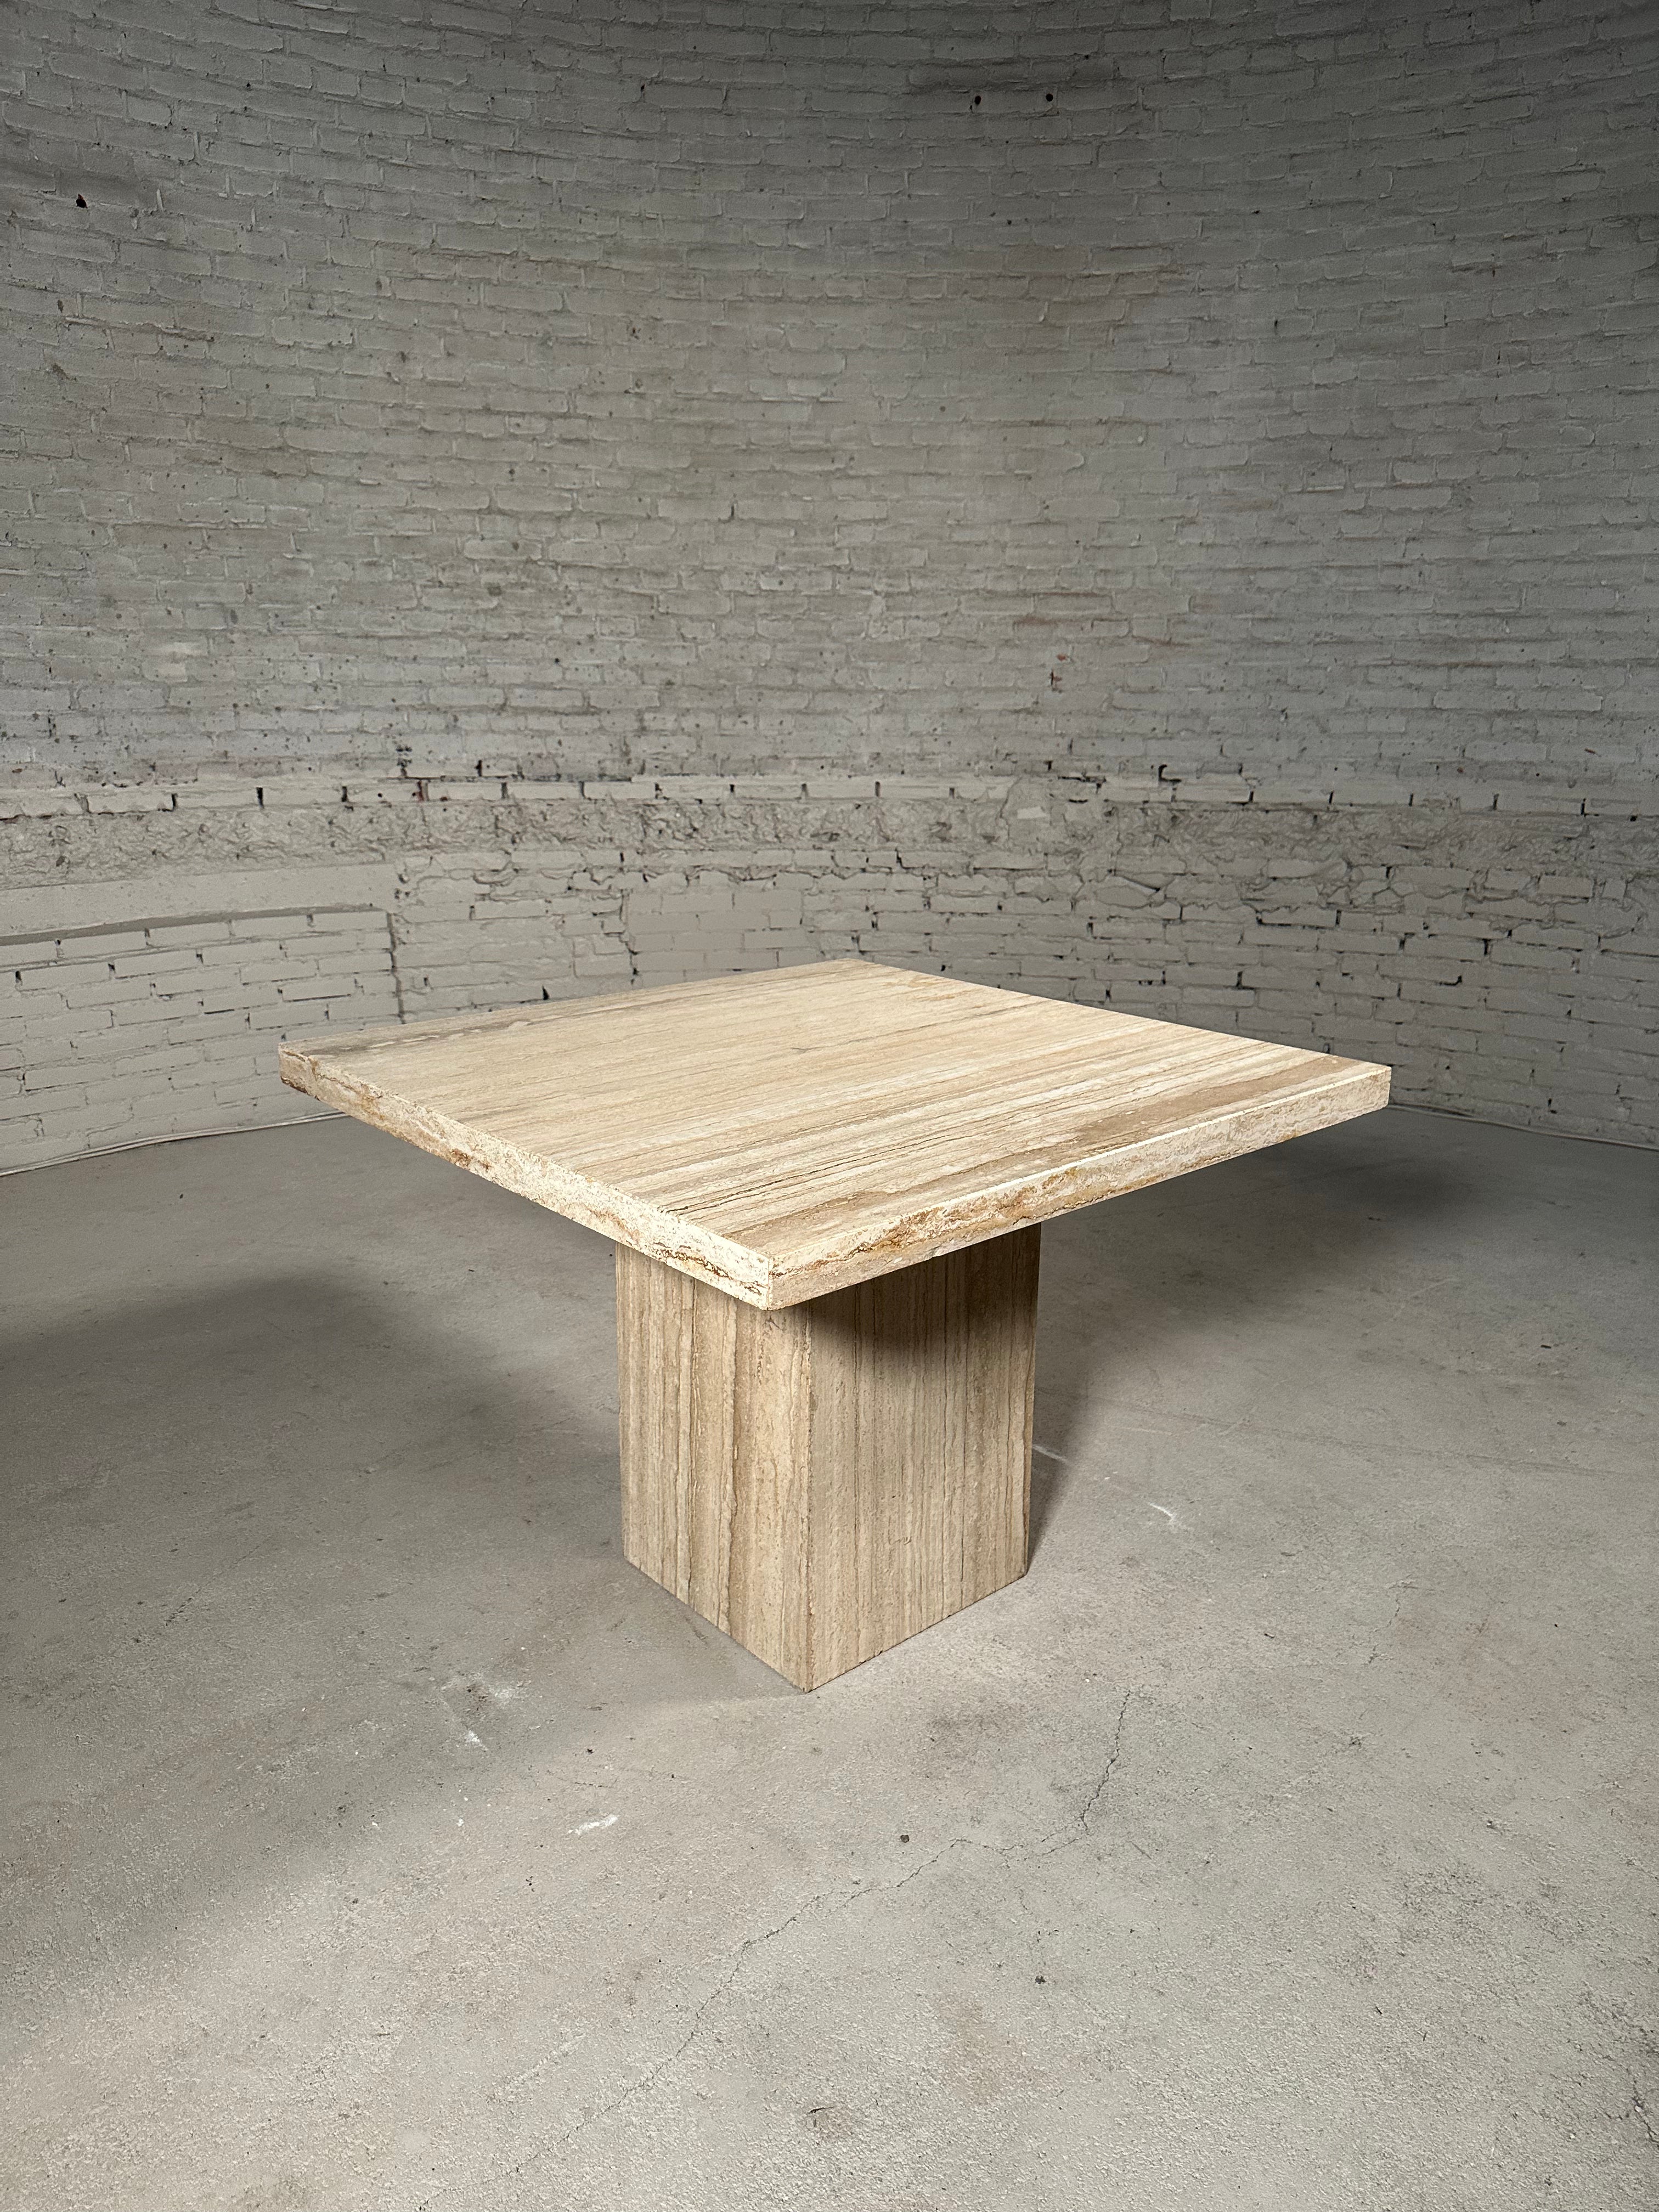 Square Travertine Dining Table